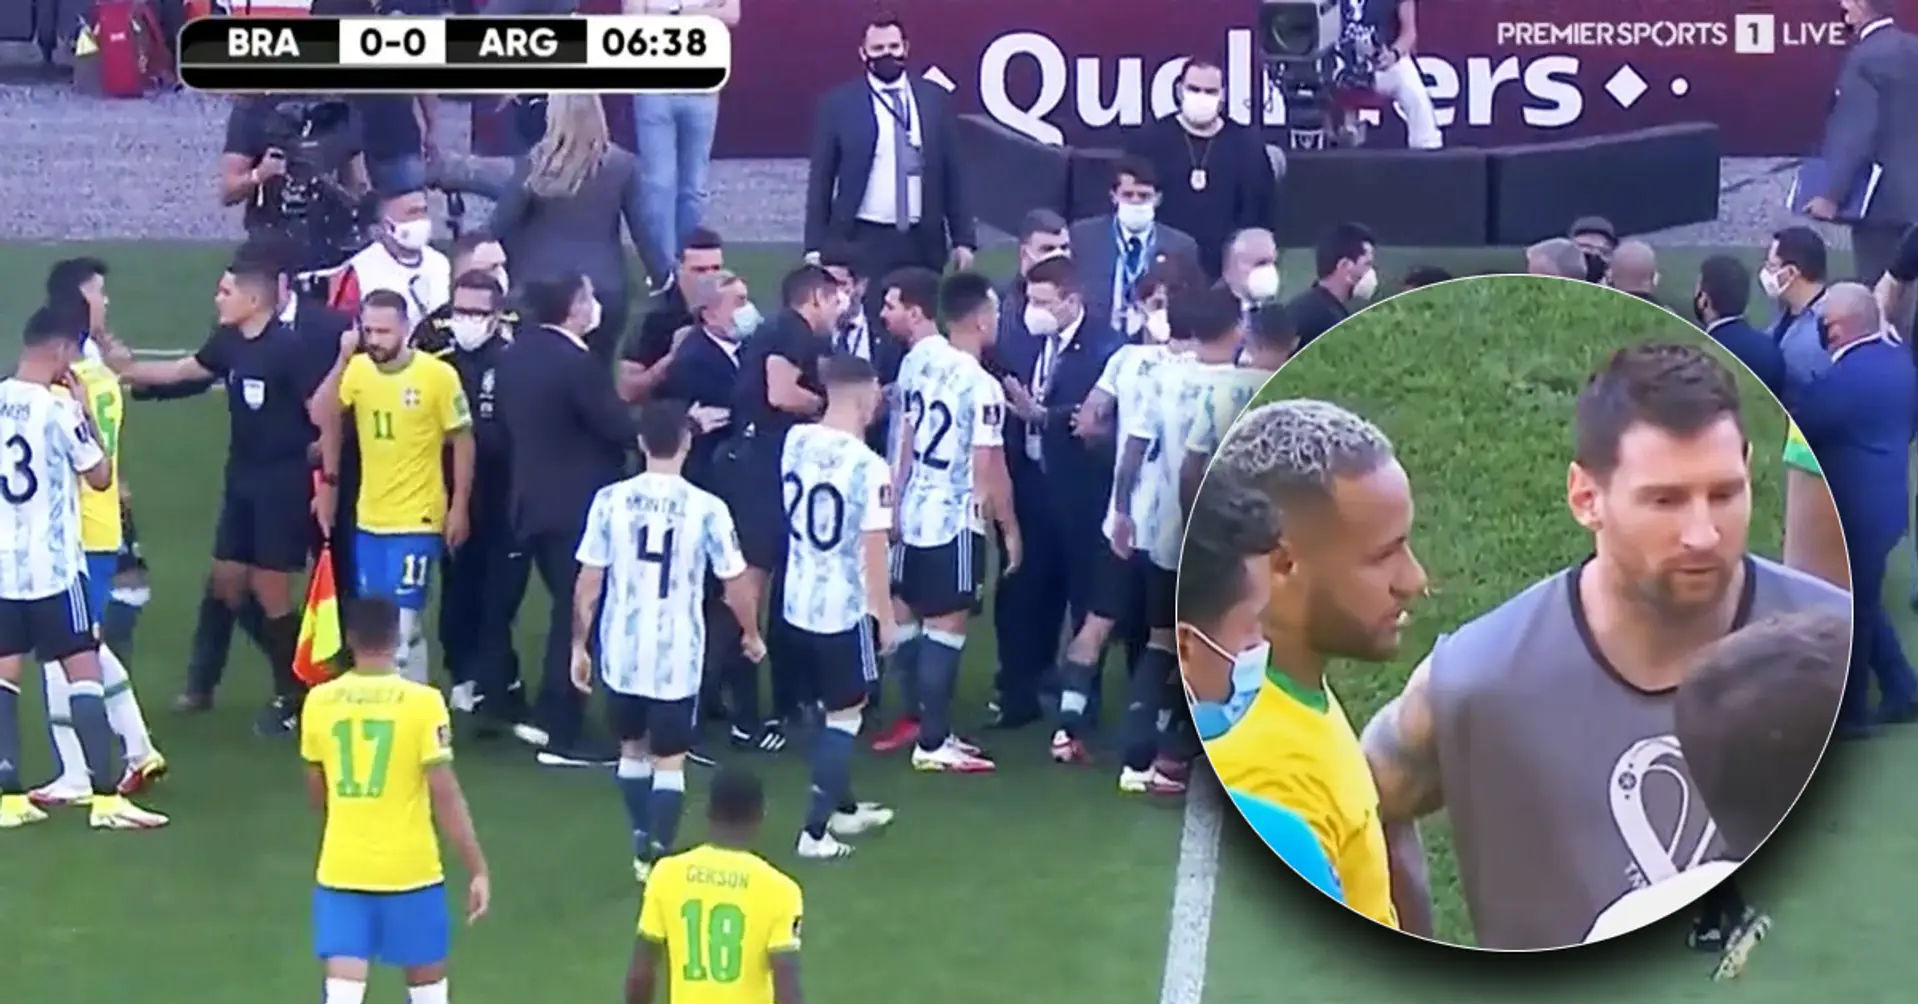 JUST IN: Police interrupts Brazil vs Argentina to deport 4 players for lying to enter the country